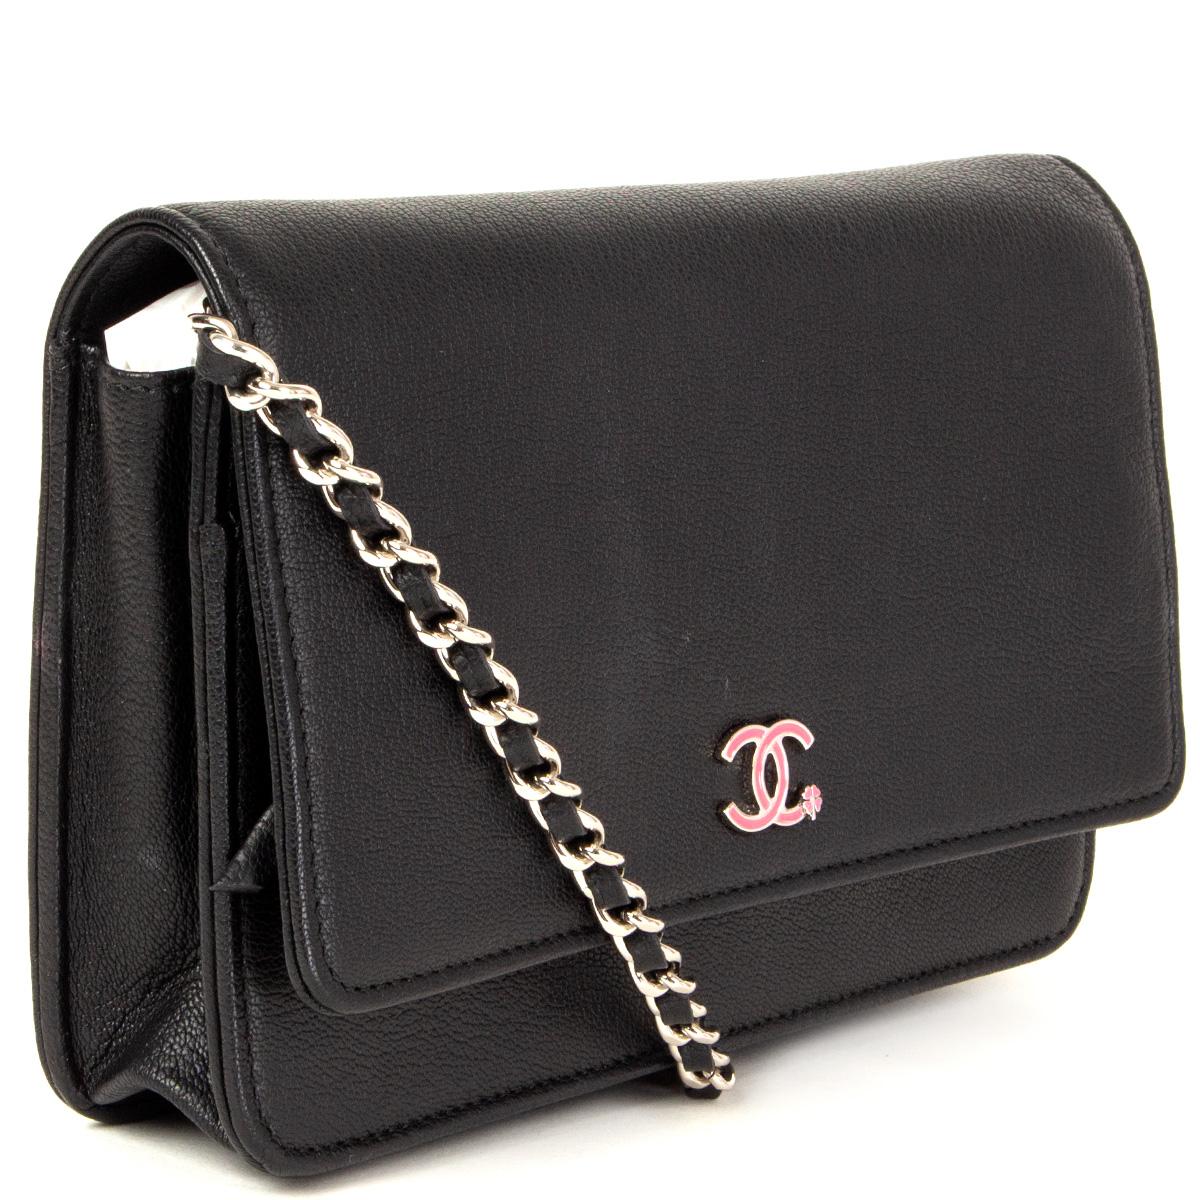 100% authentic Chanel wallet on chain in black leather with pink CC enamel and metal embellishment. Opens with a snap-button. Zipper pocket in the flap and a full-size open and zipper pocket on the front. Lined in multicolor floral fabric with an